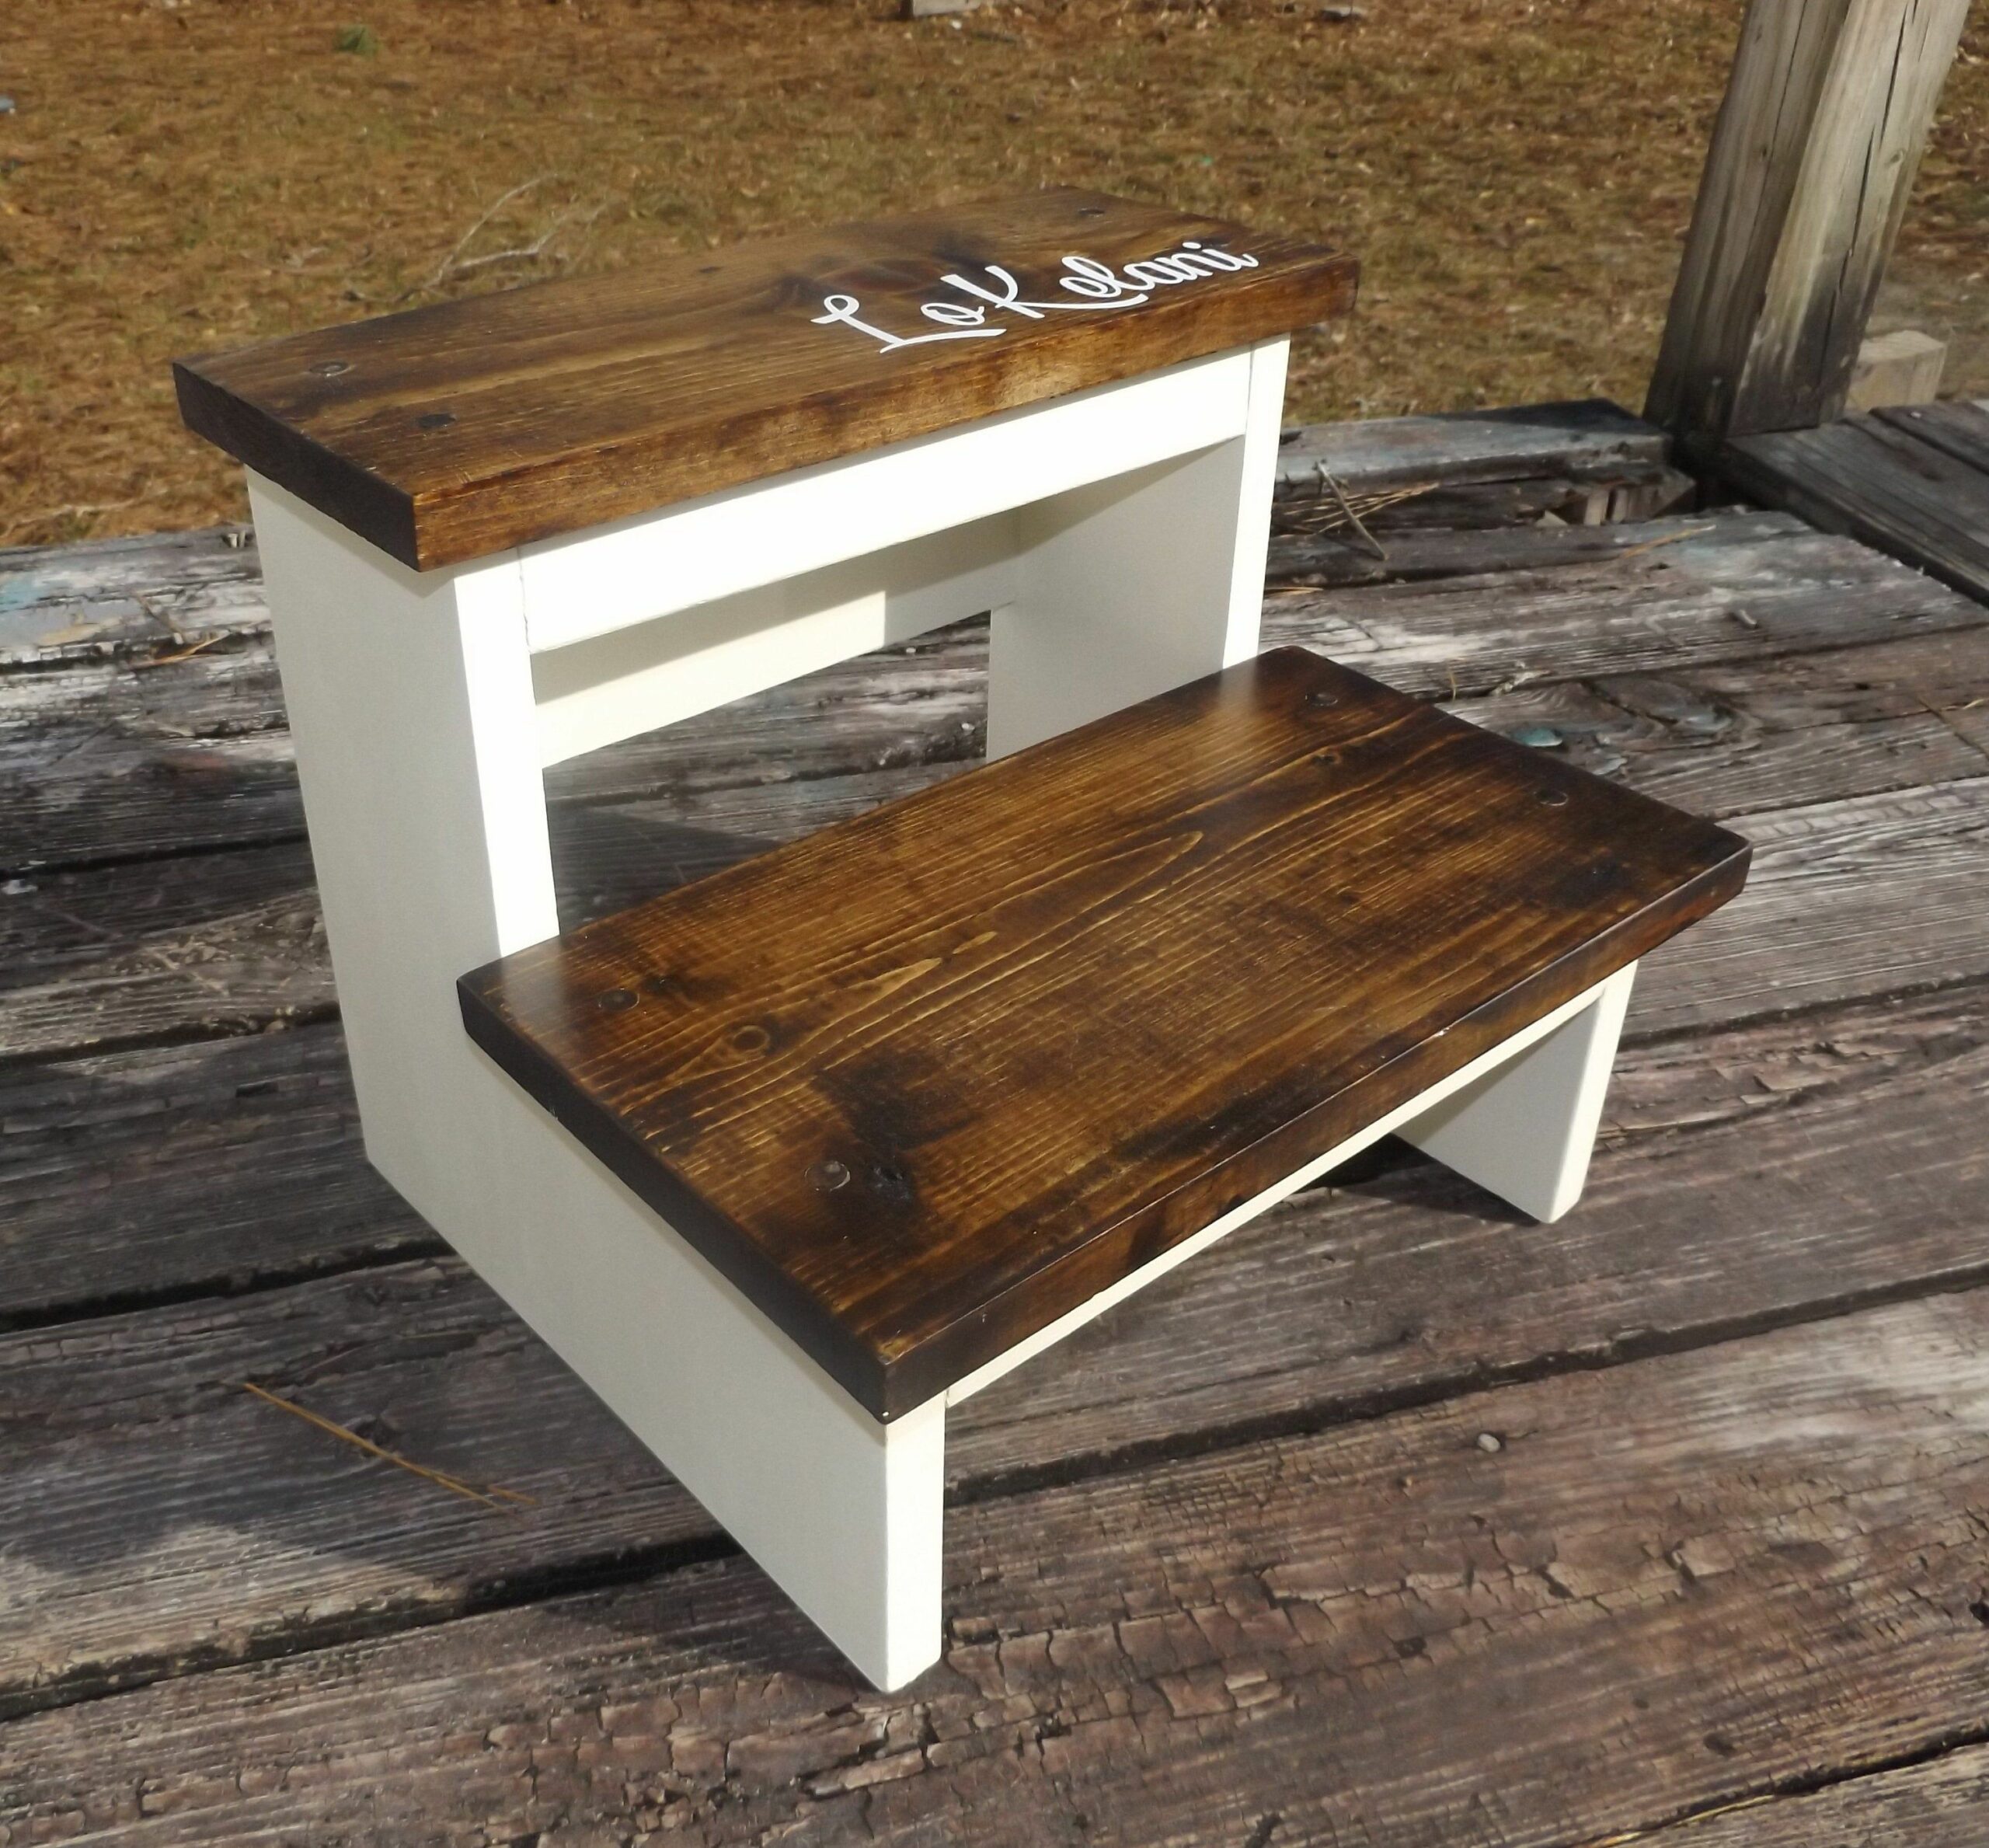 Handmade Furniture For A Personalized Touch